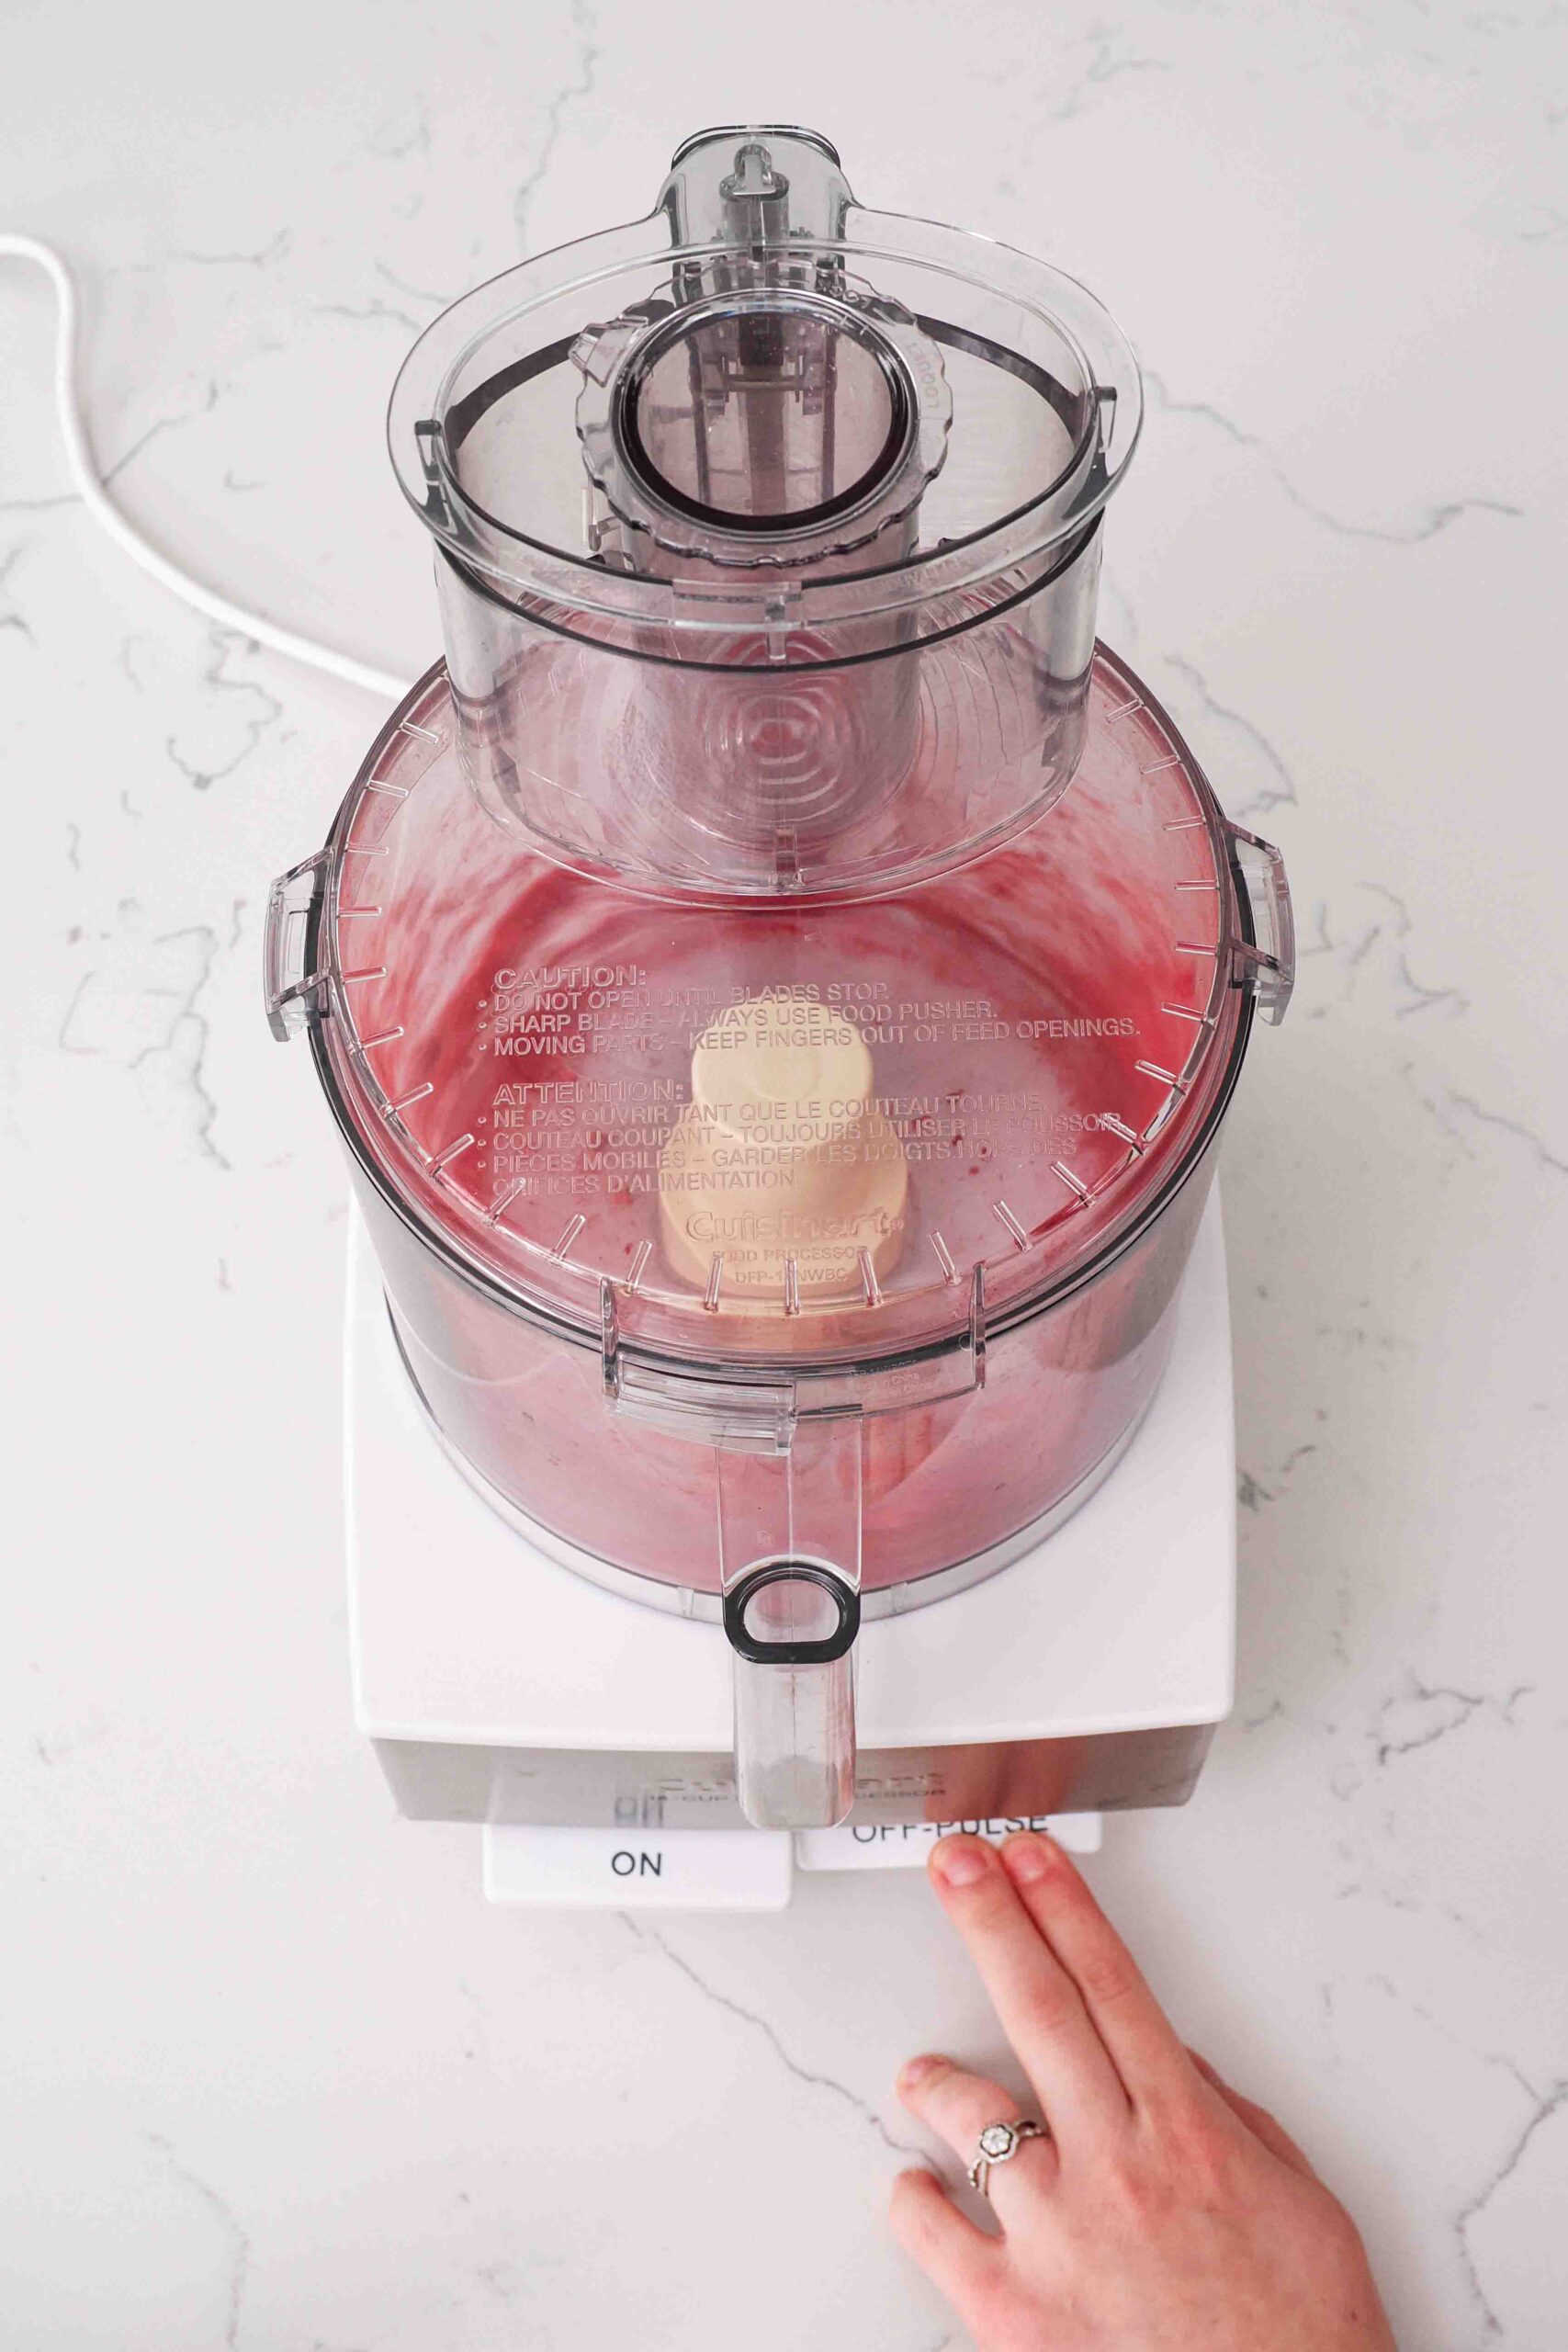 A hand presses the "pulse" button on a food processor with freeze-dried raspberries.